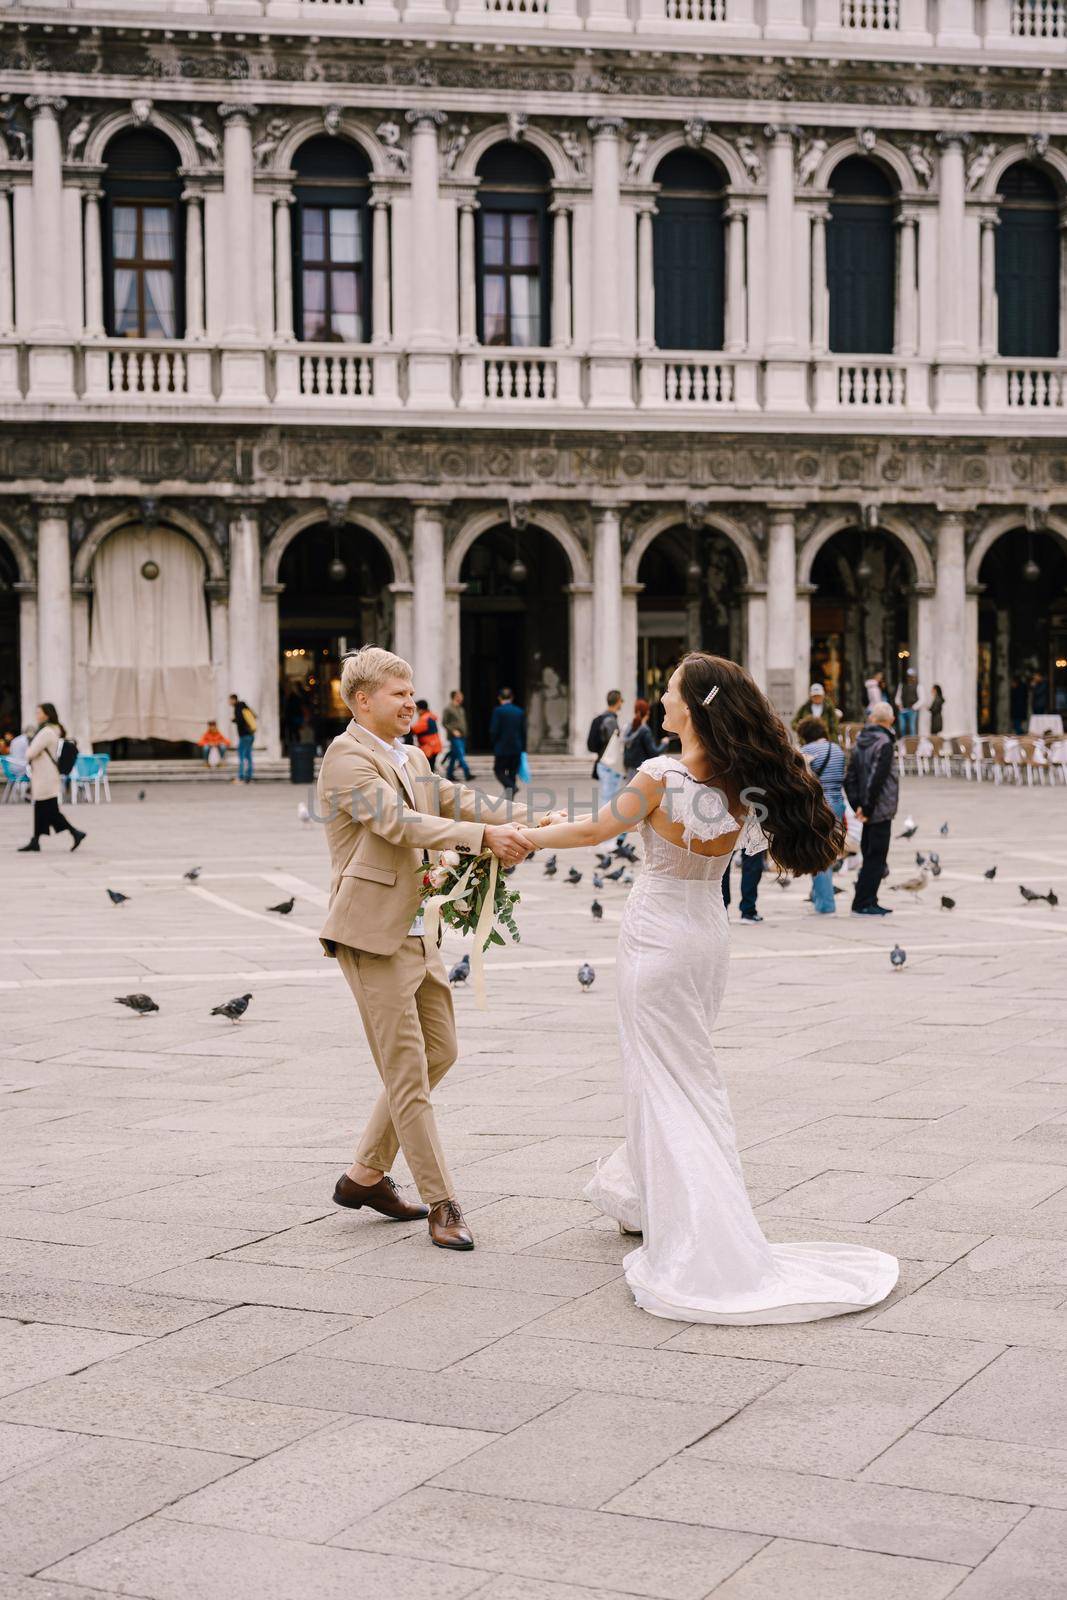 Venice, Italy - 04 october 2019: Wedding in Venice, Italy. The bride and groom are dancing among the many pigeons in Piazza San Marco, against the backdrop of National Archaeological Museum Venice by Nadtochiy